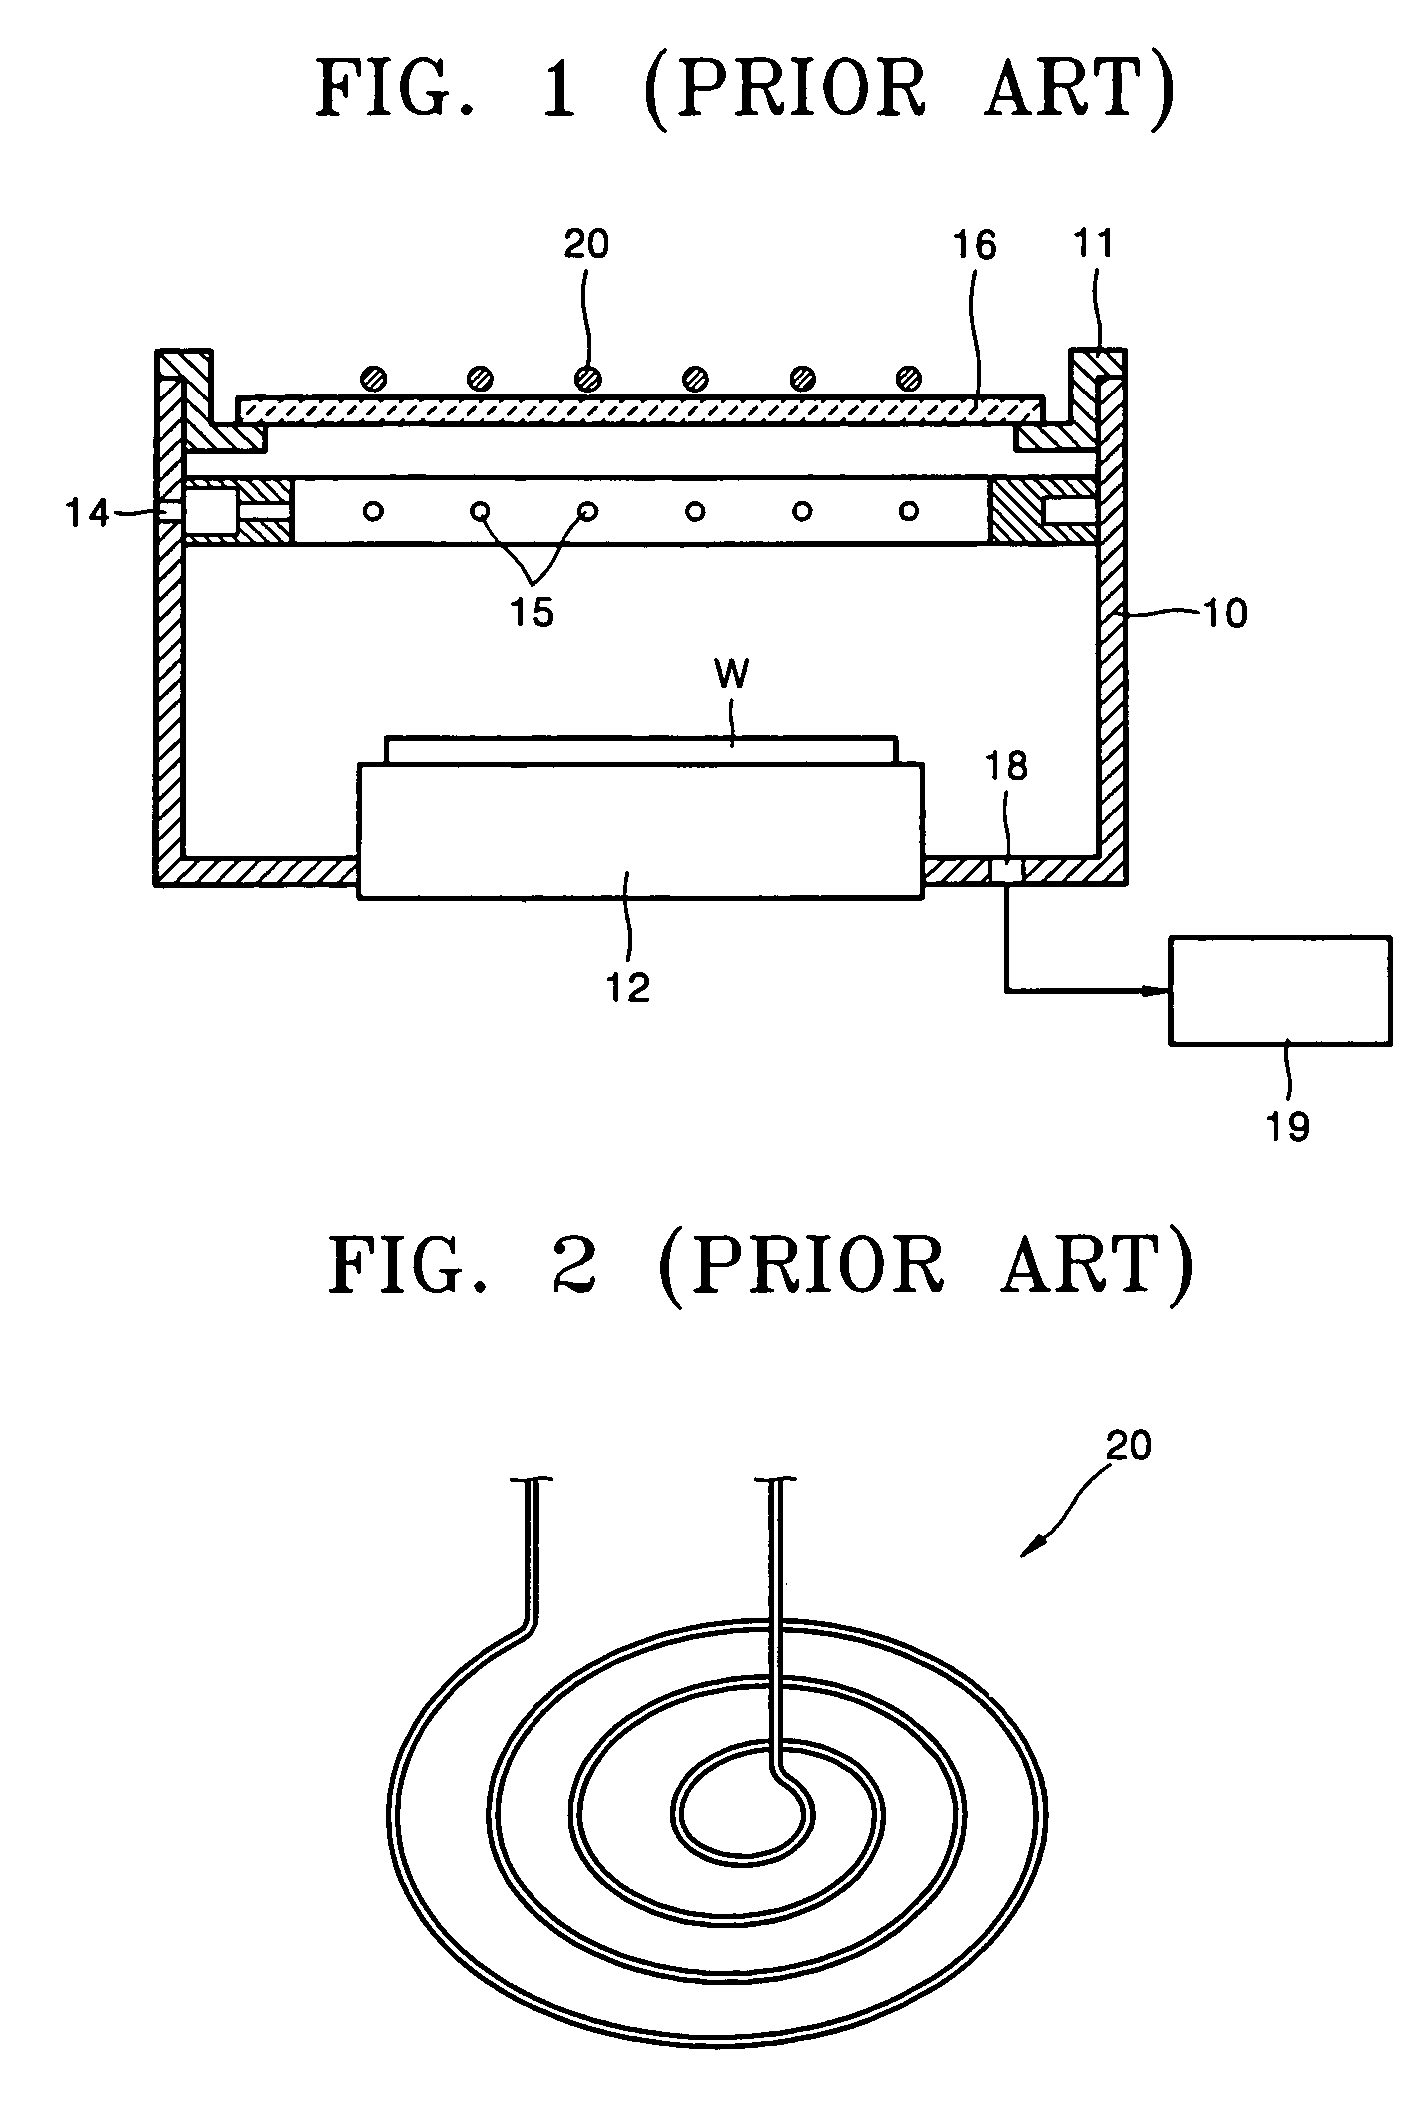 Inductively coupled antenna and plasma processing apparatus using the same